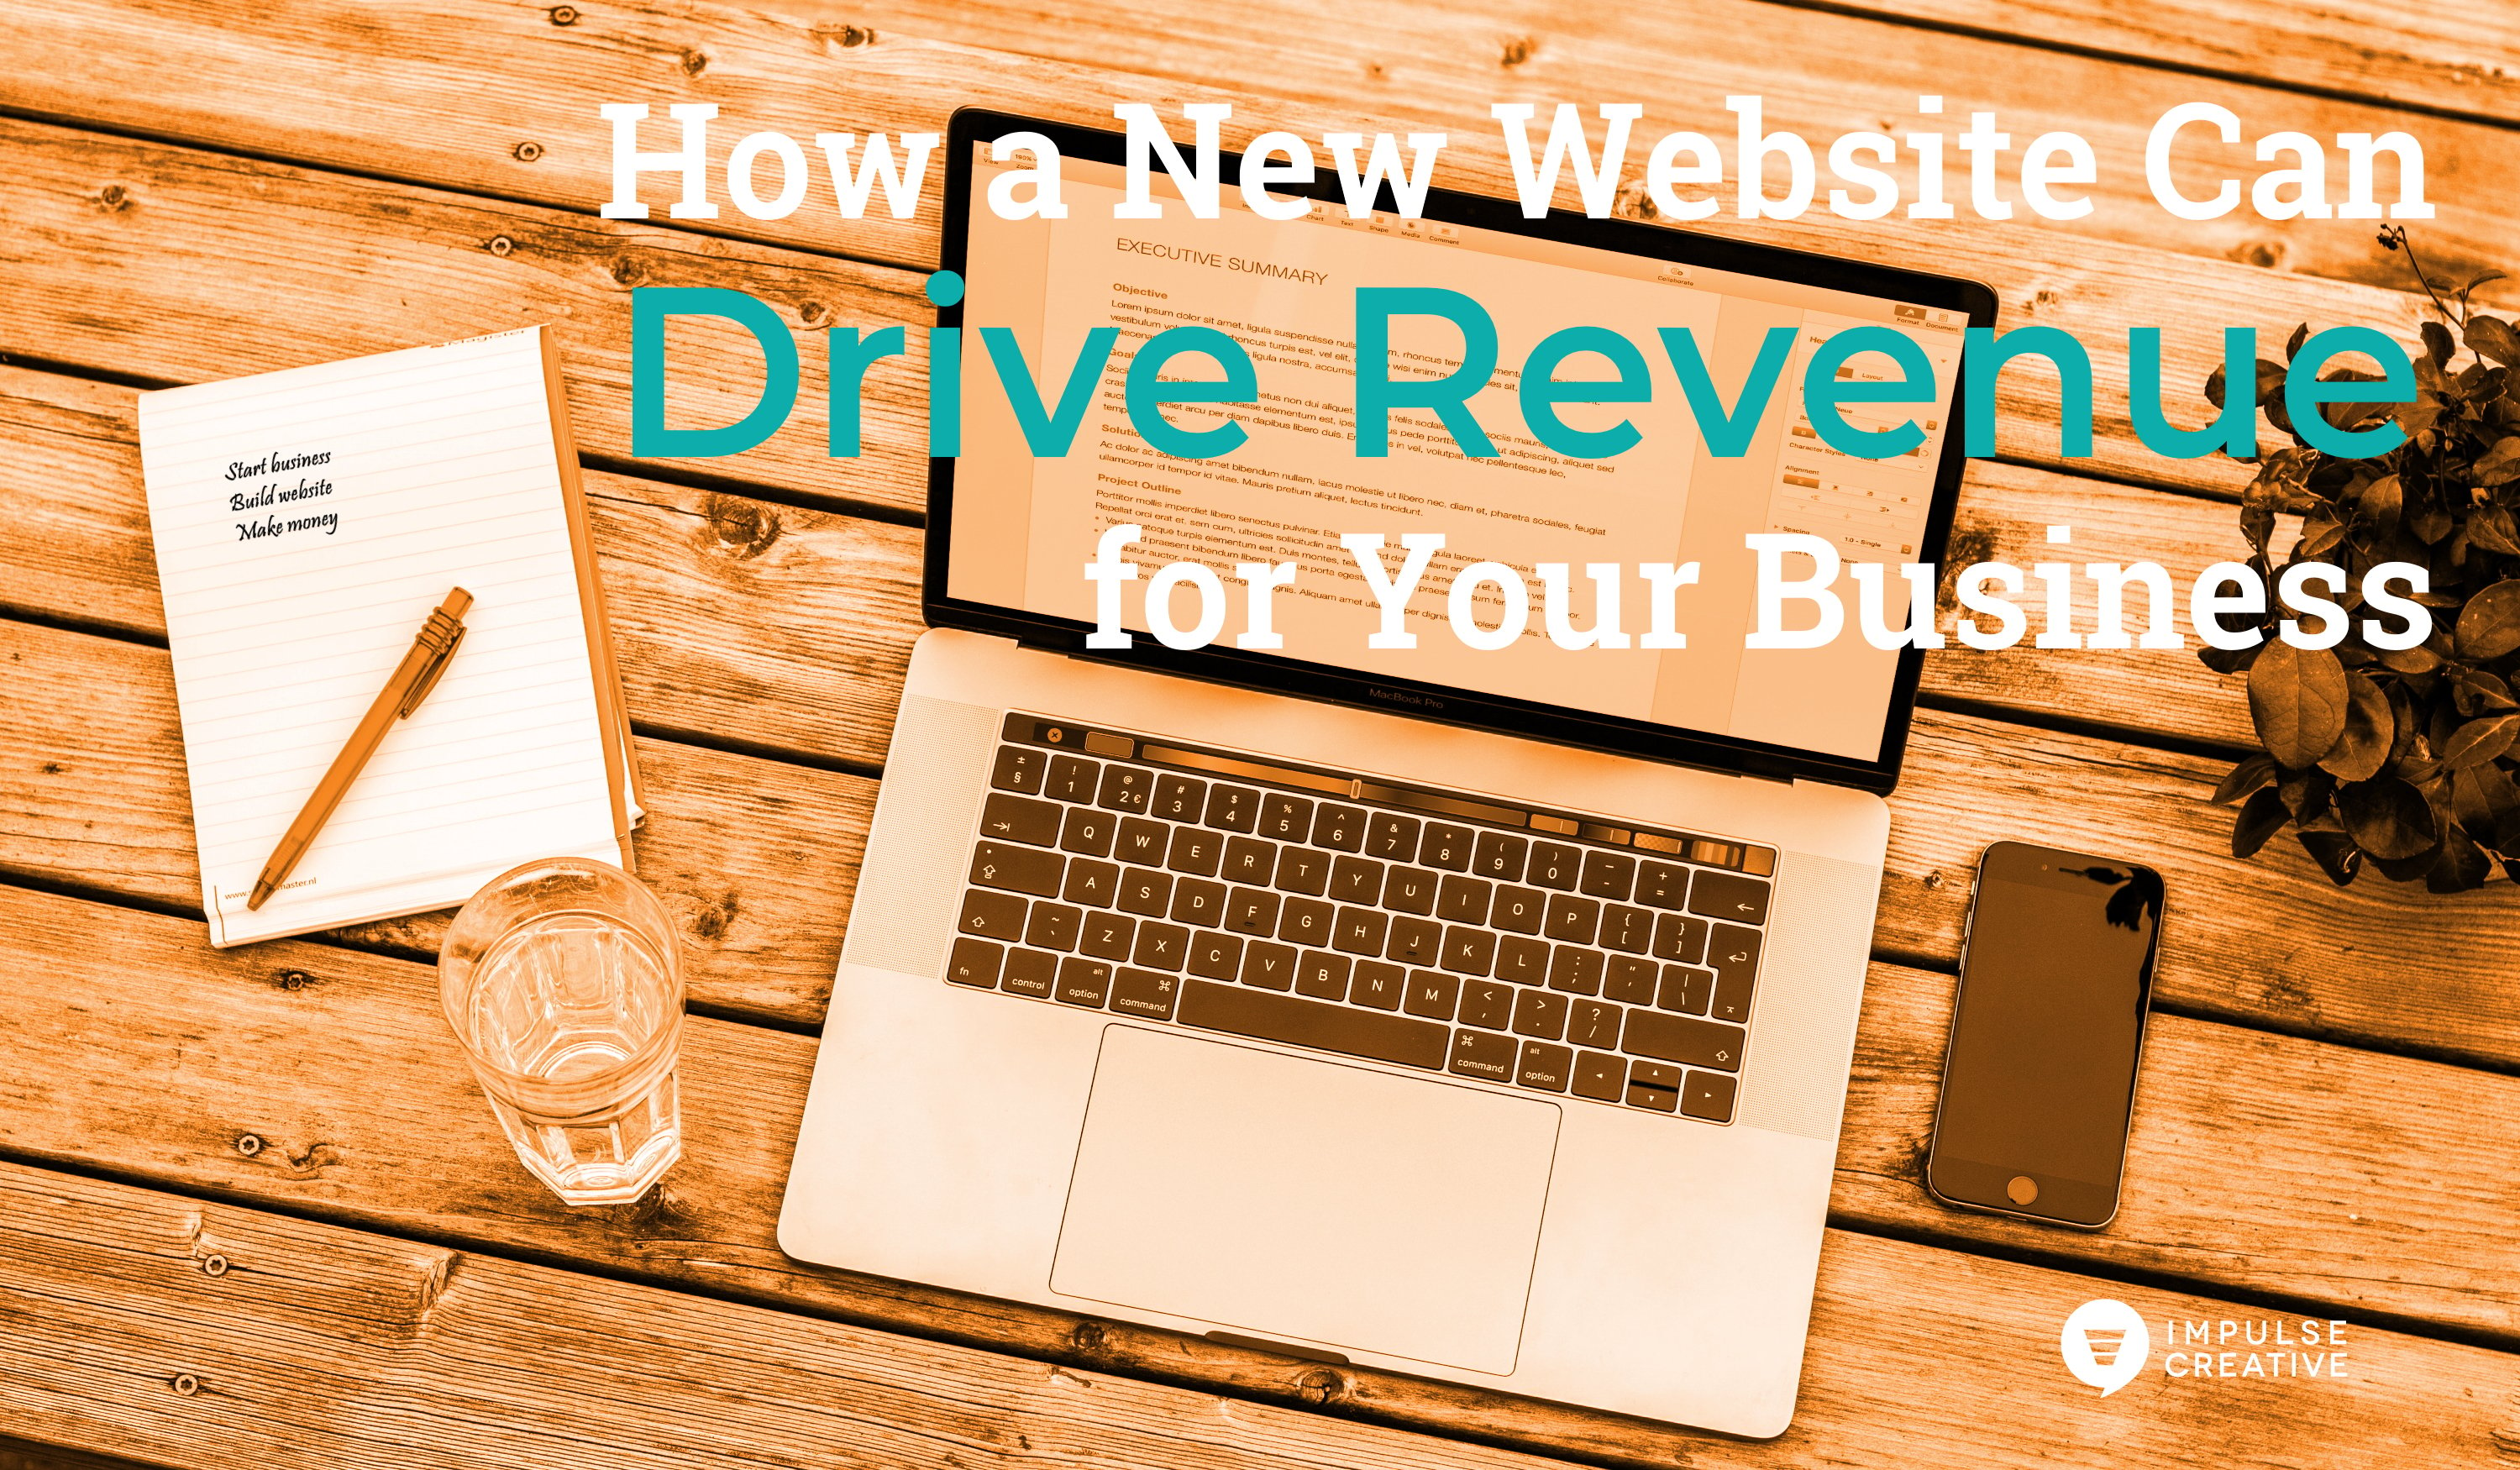 how-a-new-website-can-drive-revenue